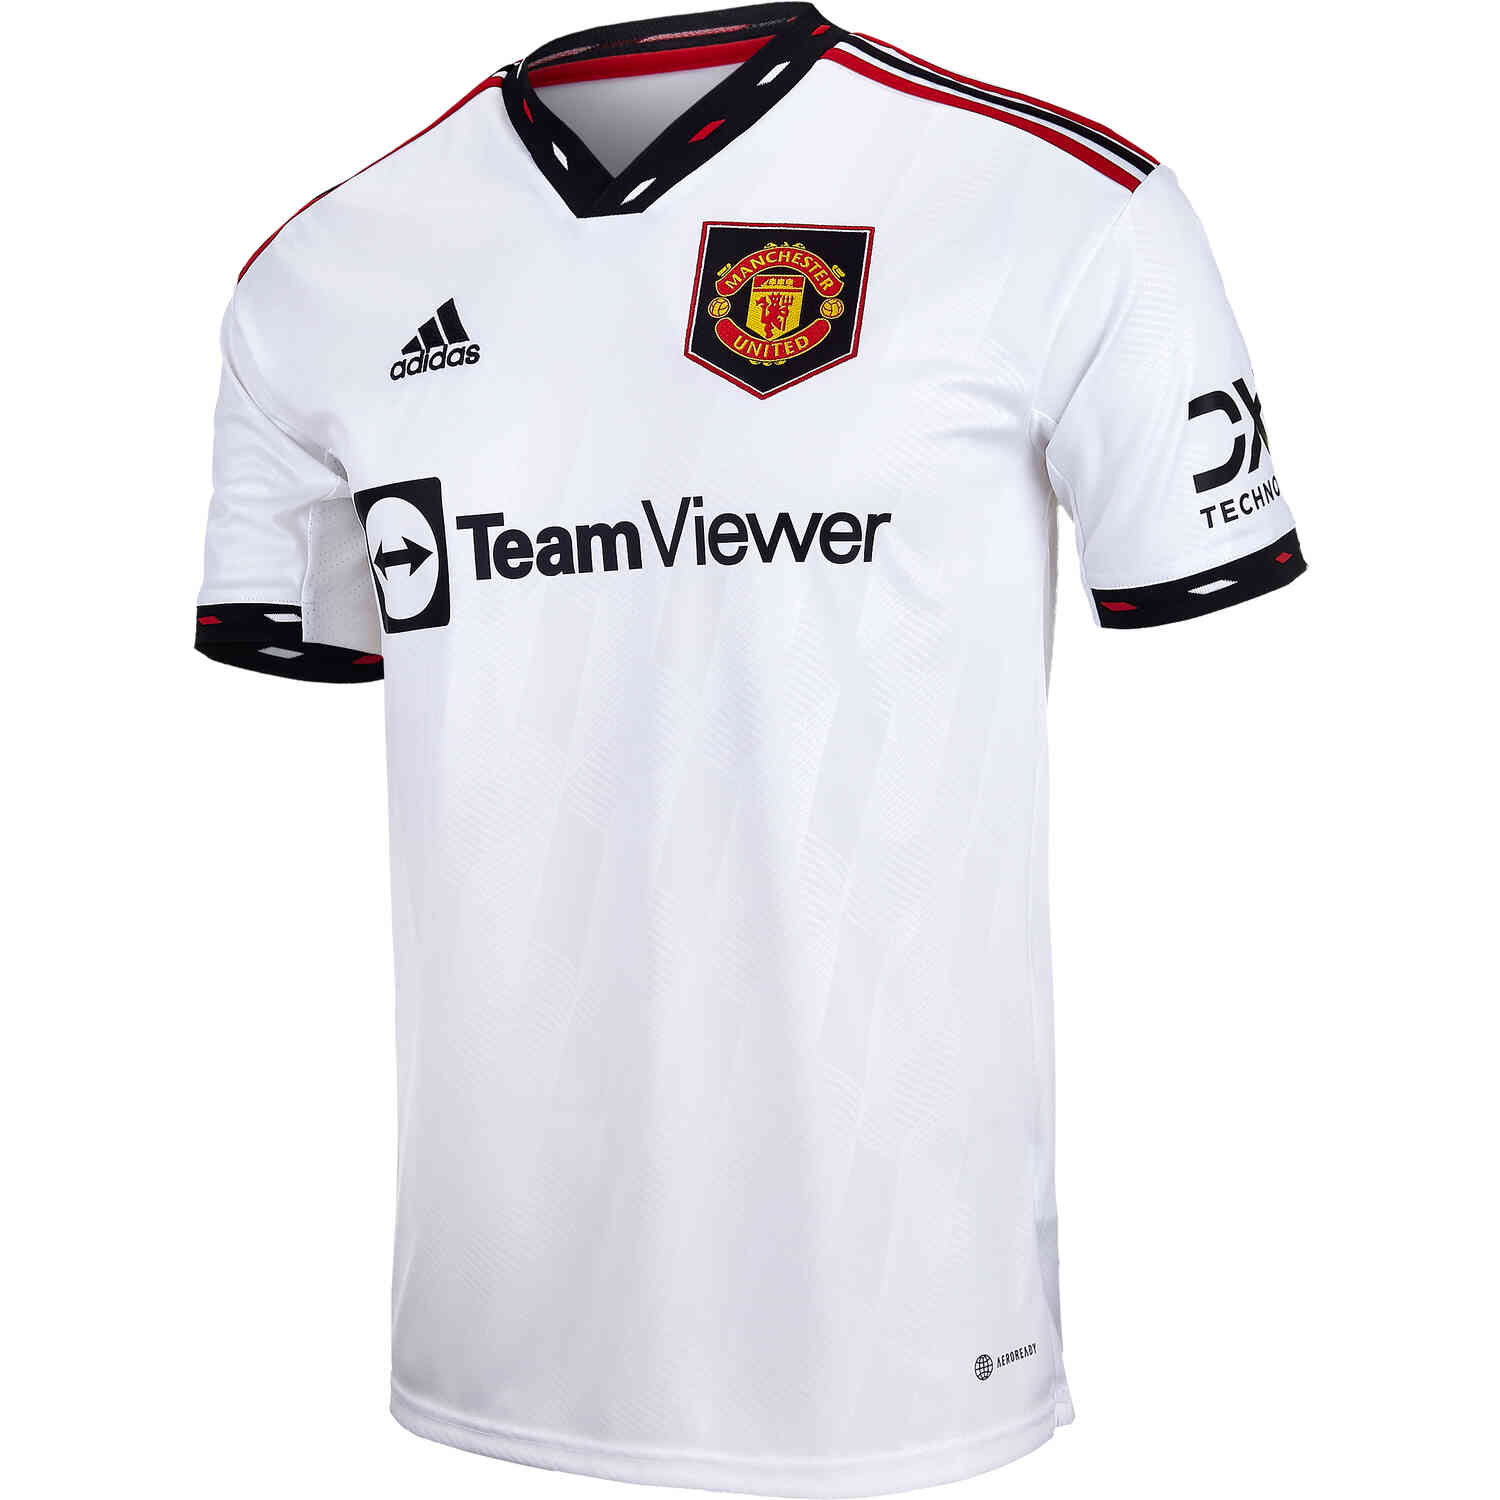 manchester united t shirts